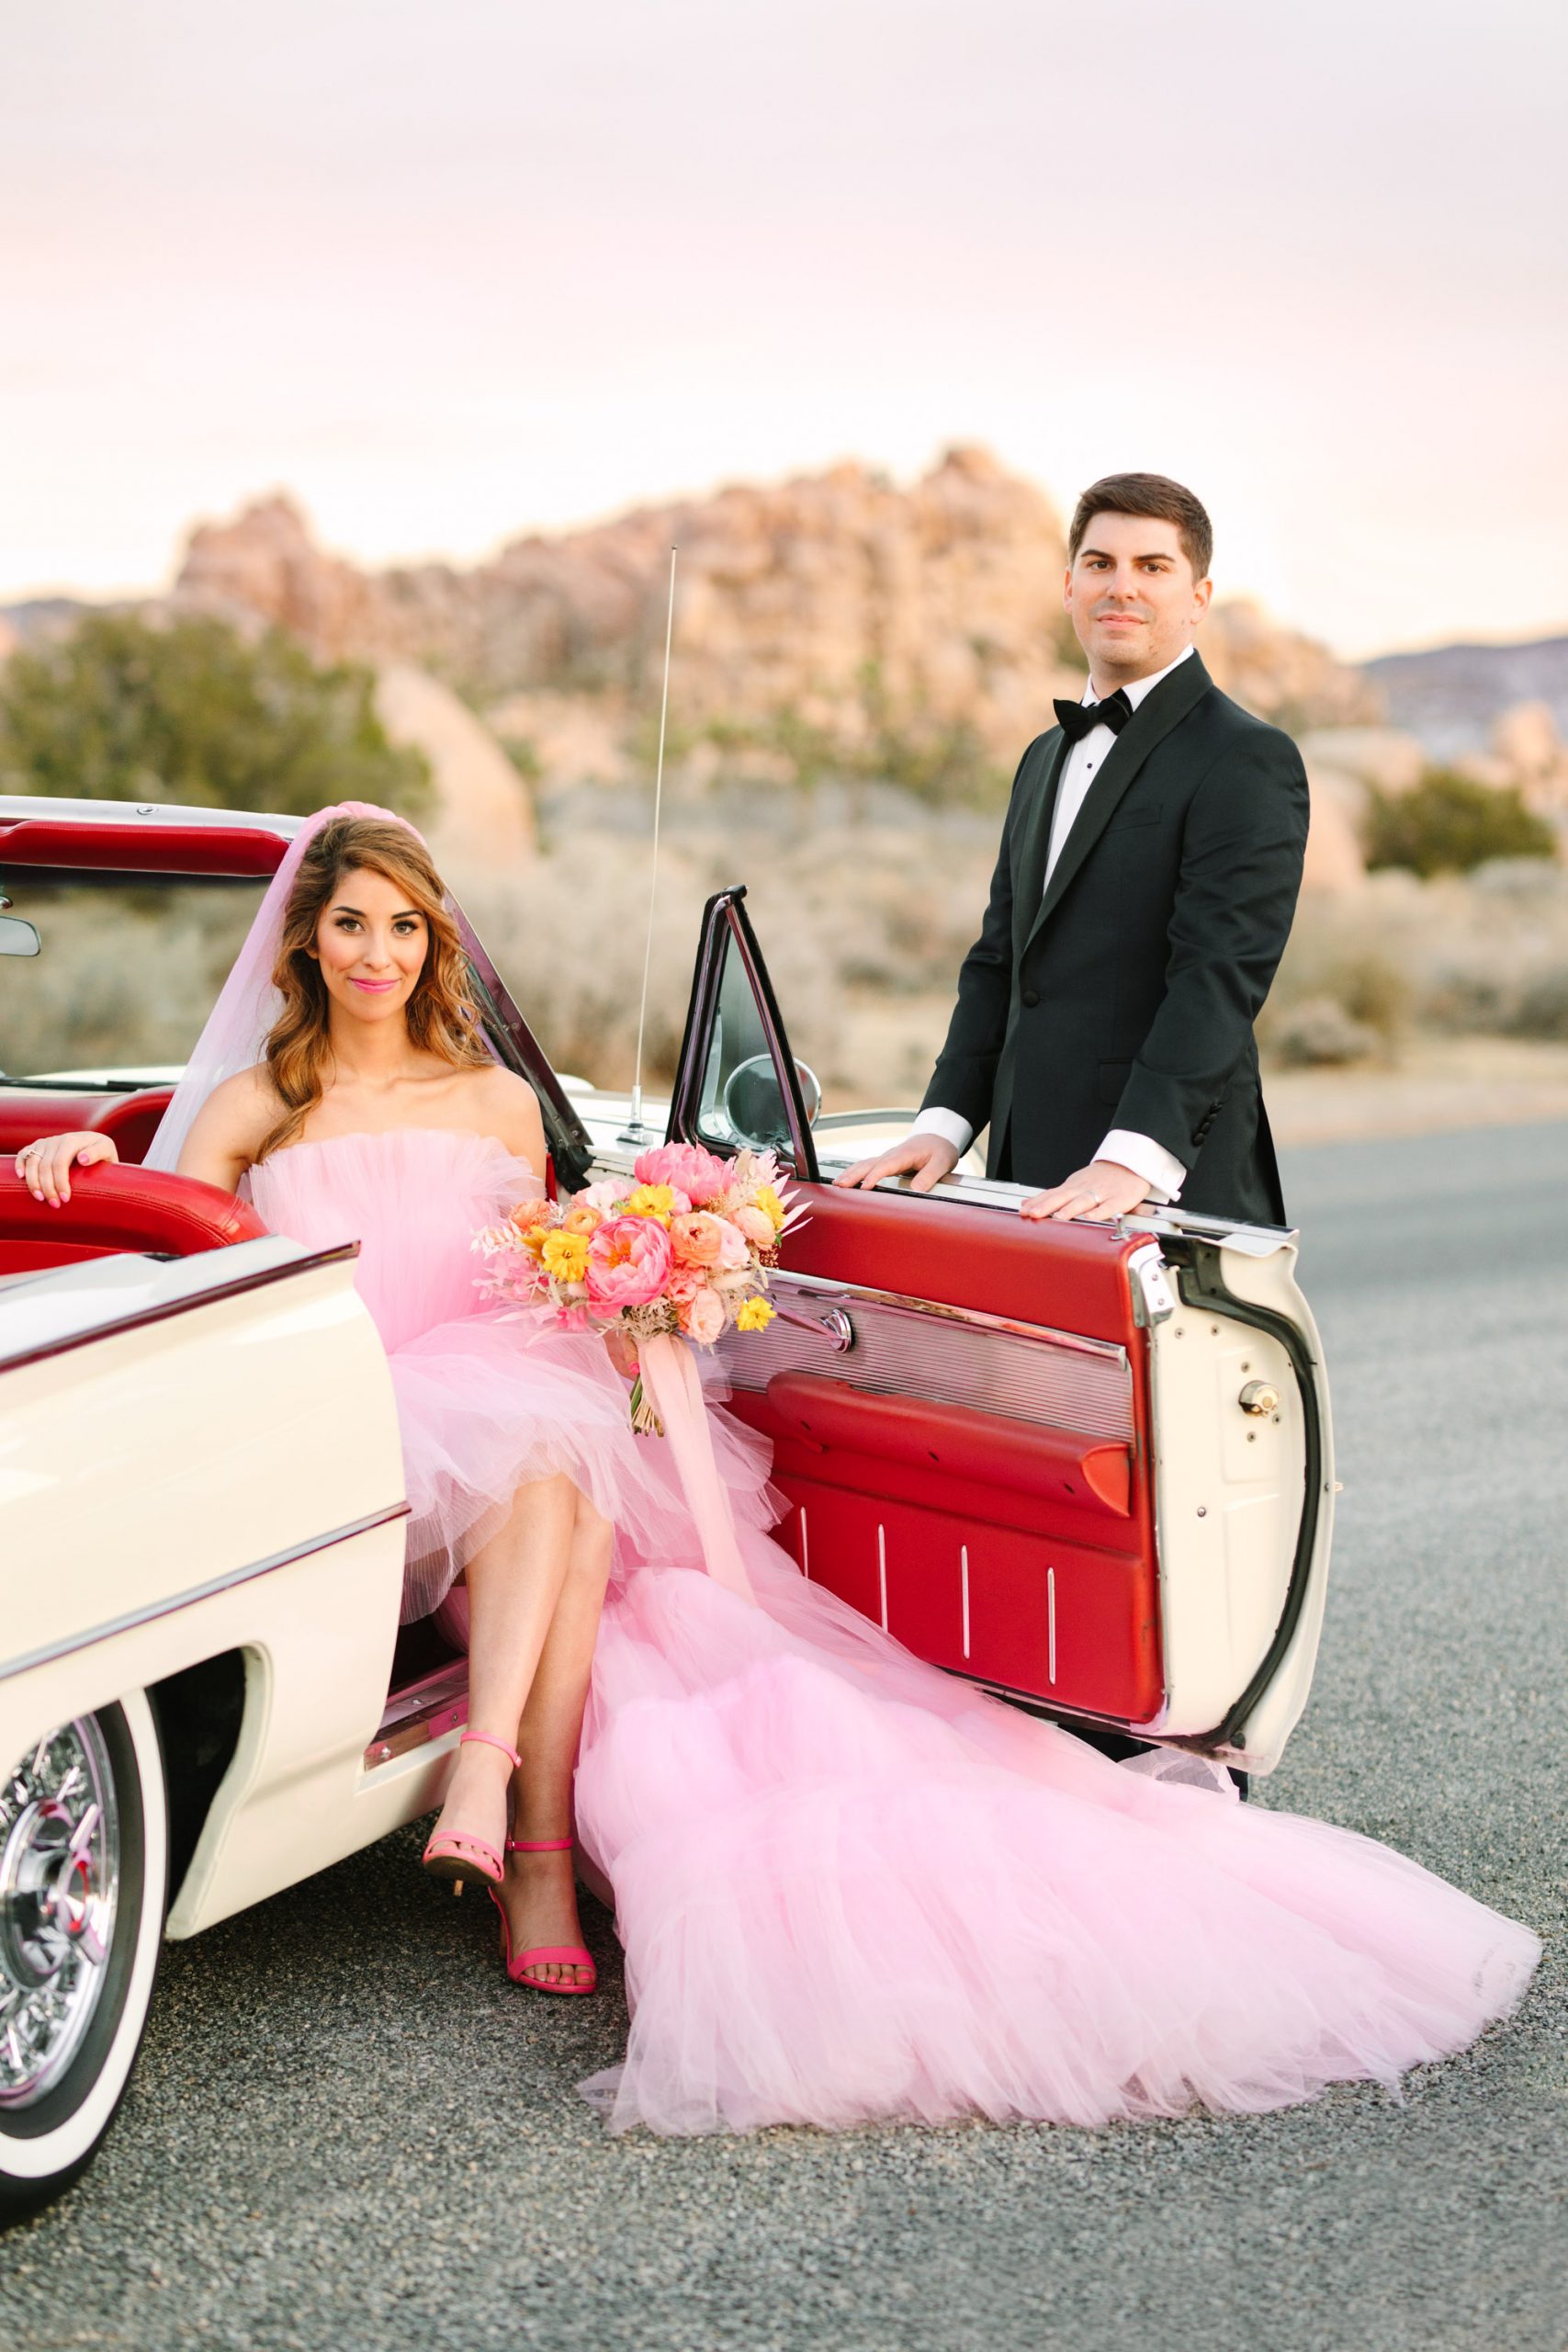 Bride and groom posing with white classic convertible car | Pink wedding dress Joshua Tree elopement featured on Green Wedding Shoes | Colorful desert wedding inspiration for fun-loving couples in Southern California #joshuatreewedding #joshuatreeelopement #pinkwedding #greenweddingshoes Source: Mary Costa Photography | Los Angeles